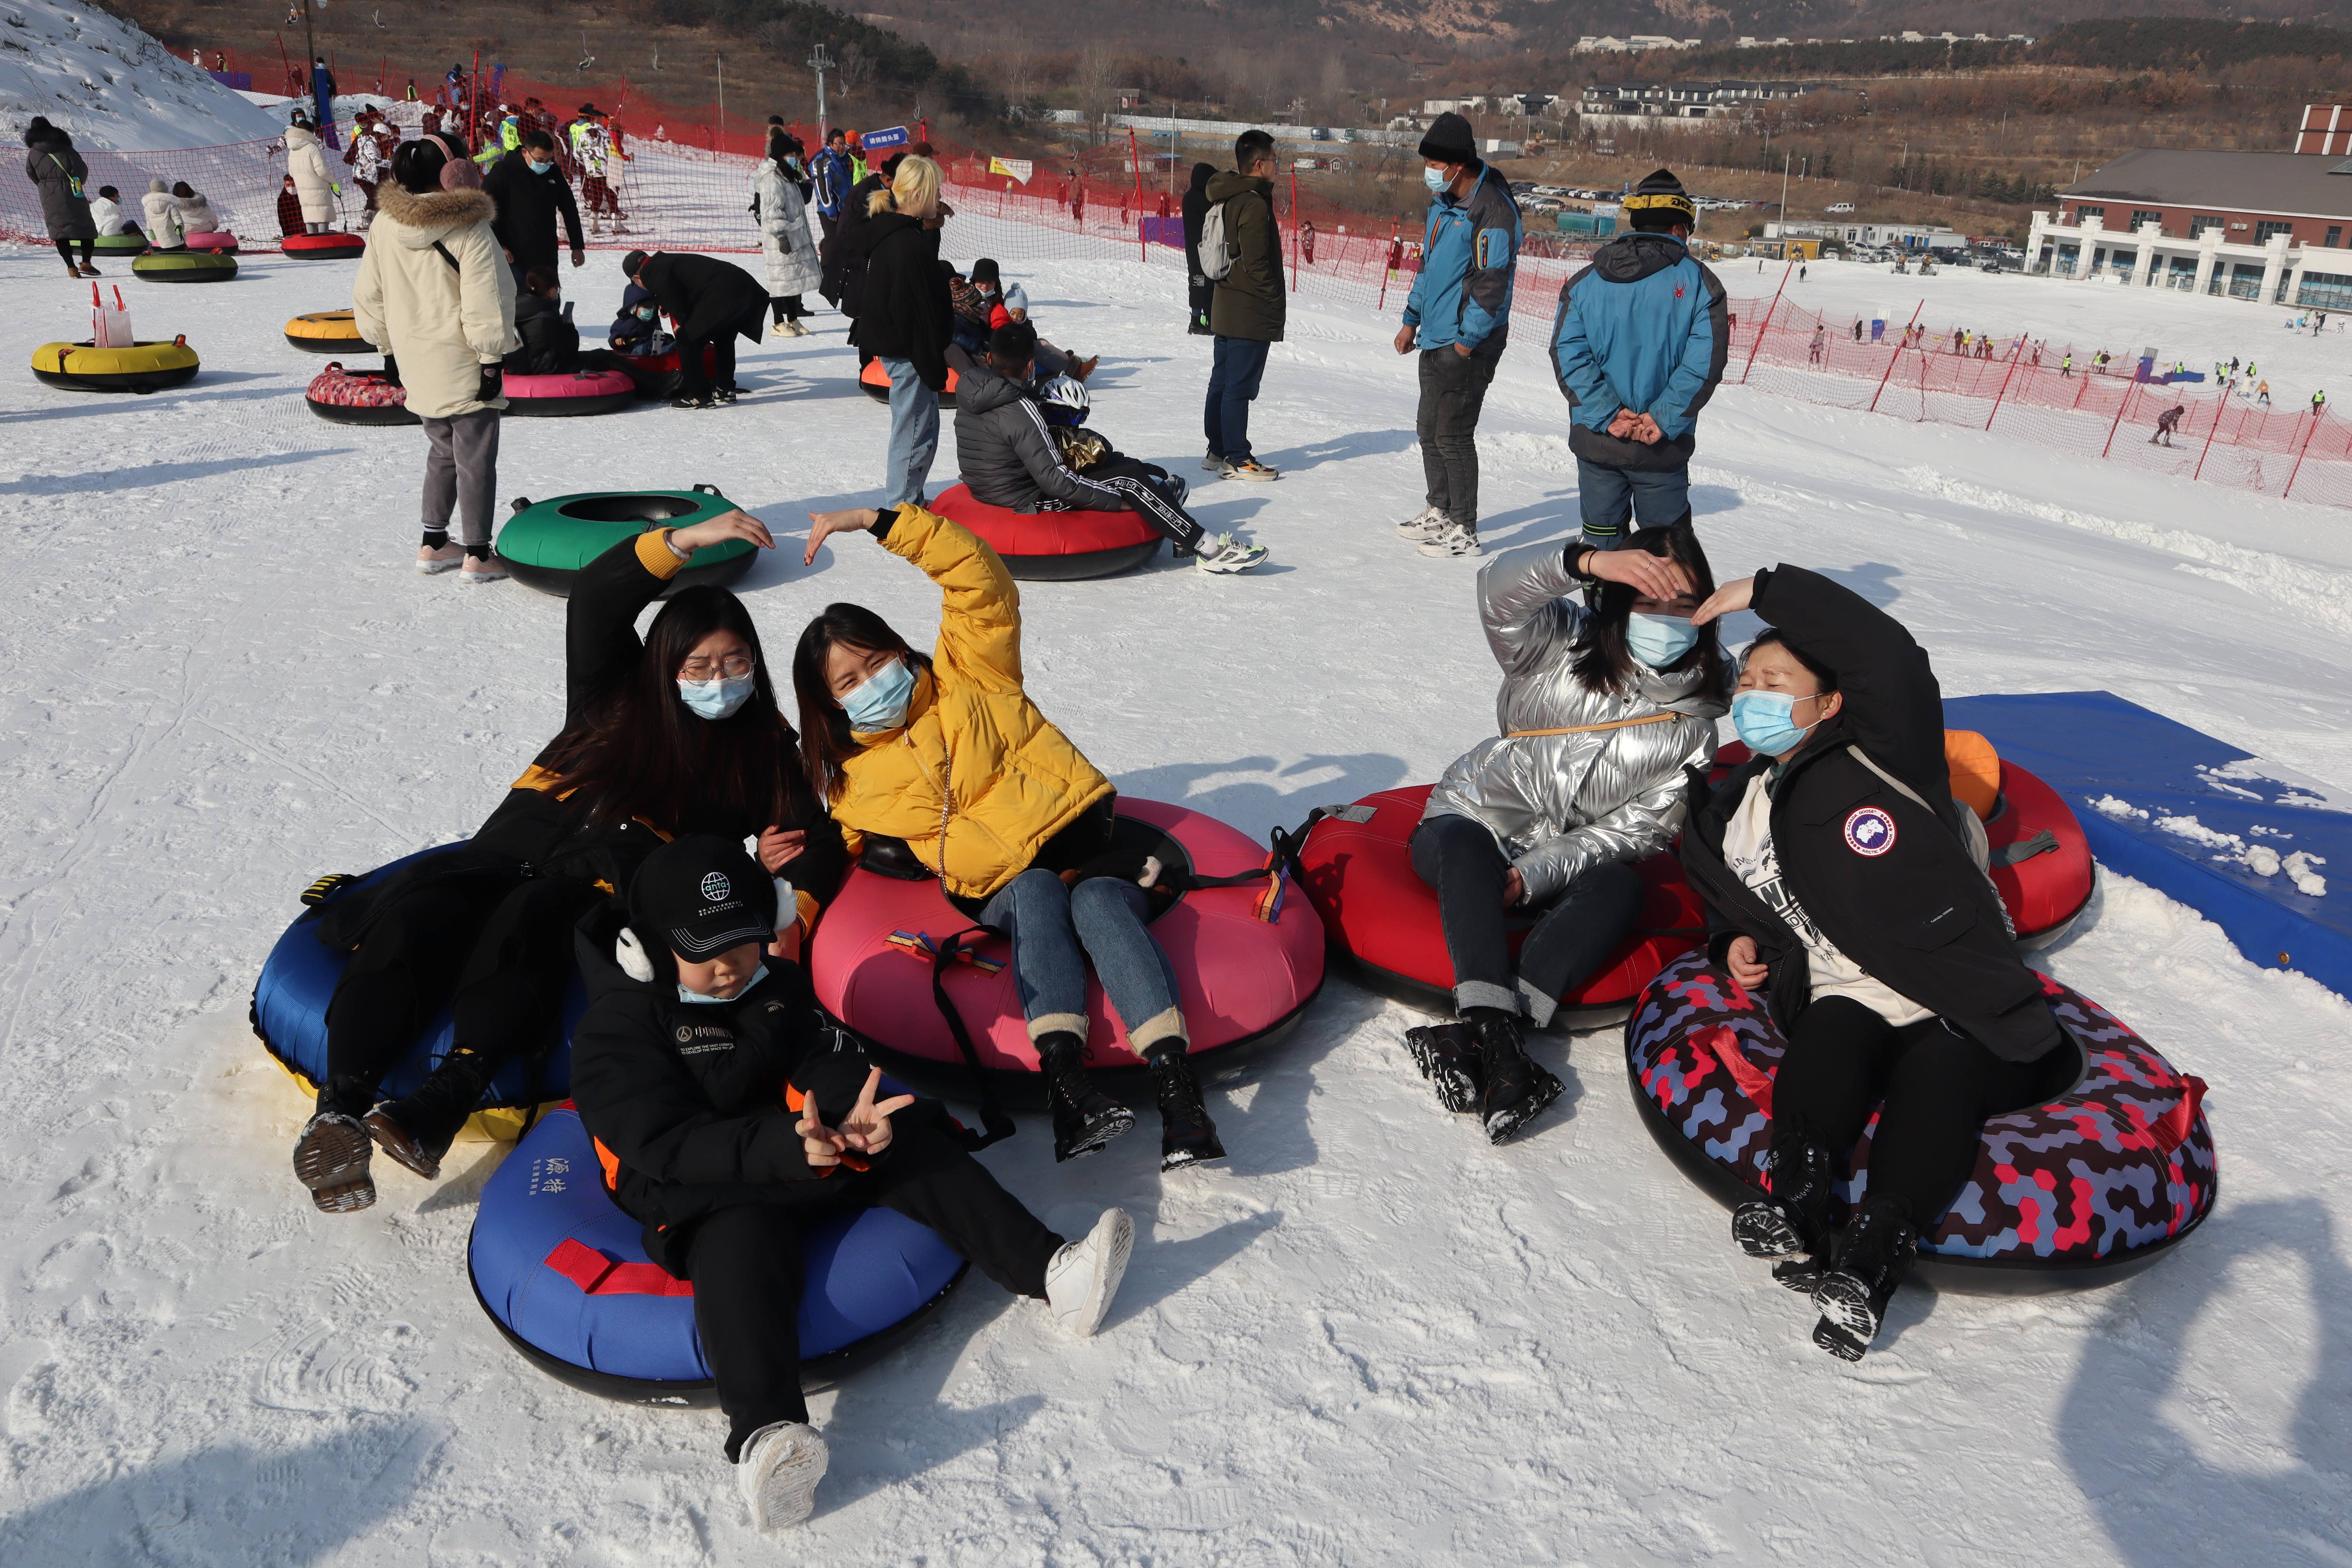 Have fun with our snow tube sleds!